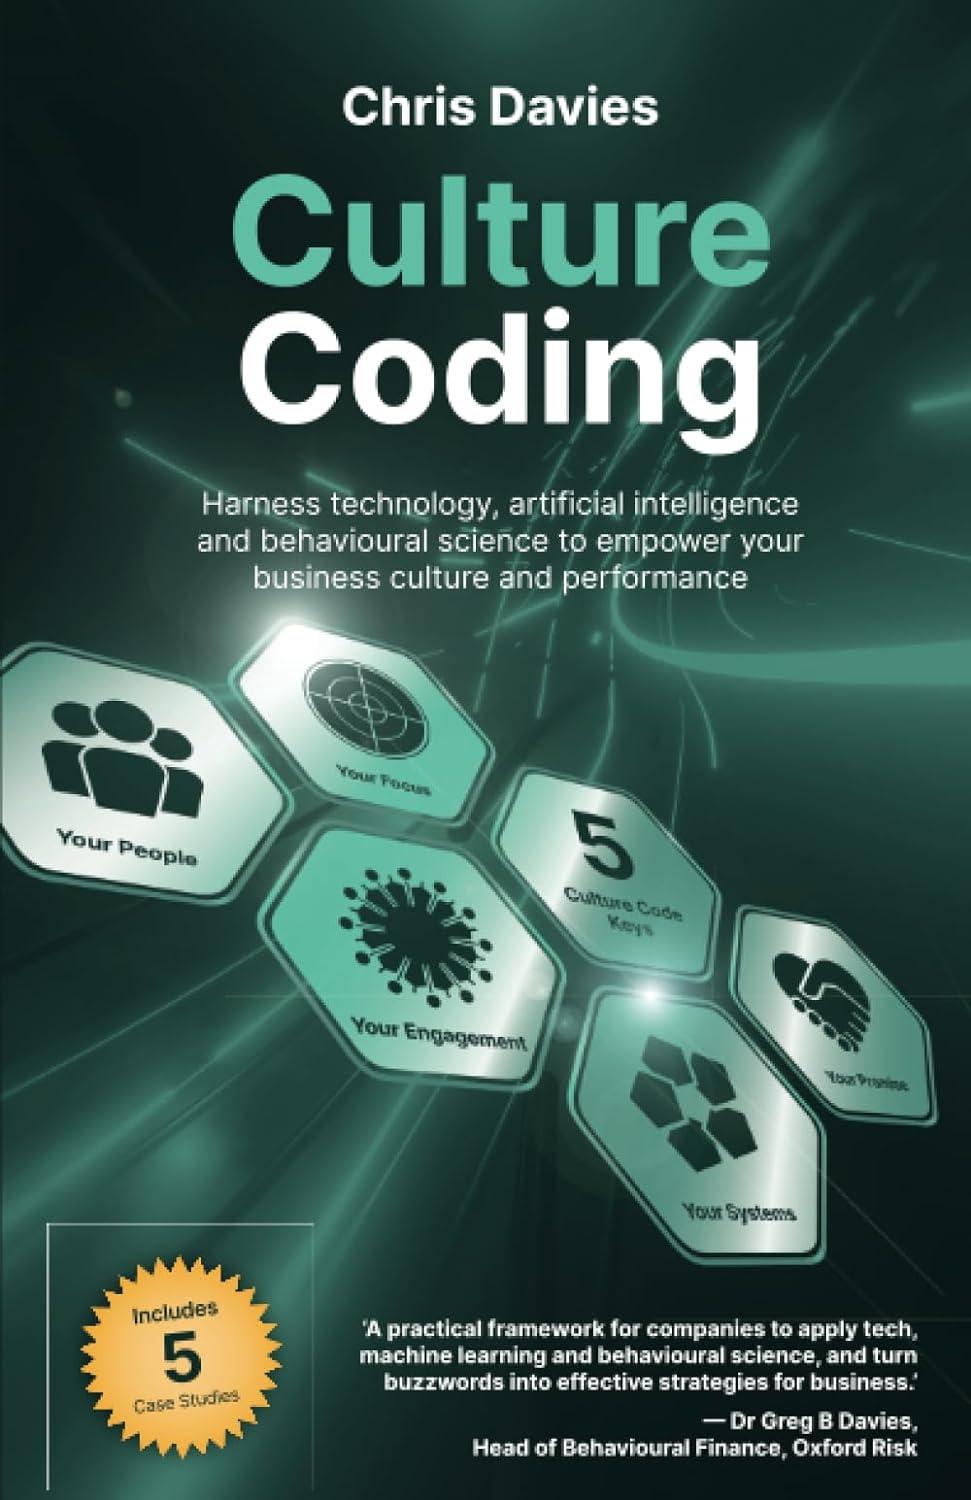 culture coding  harness technology and artificial intelligence to empower your business culture and